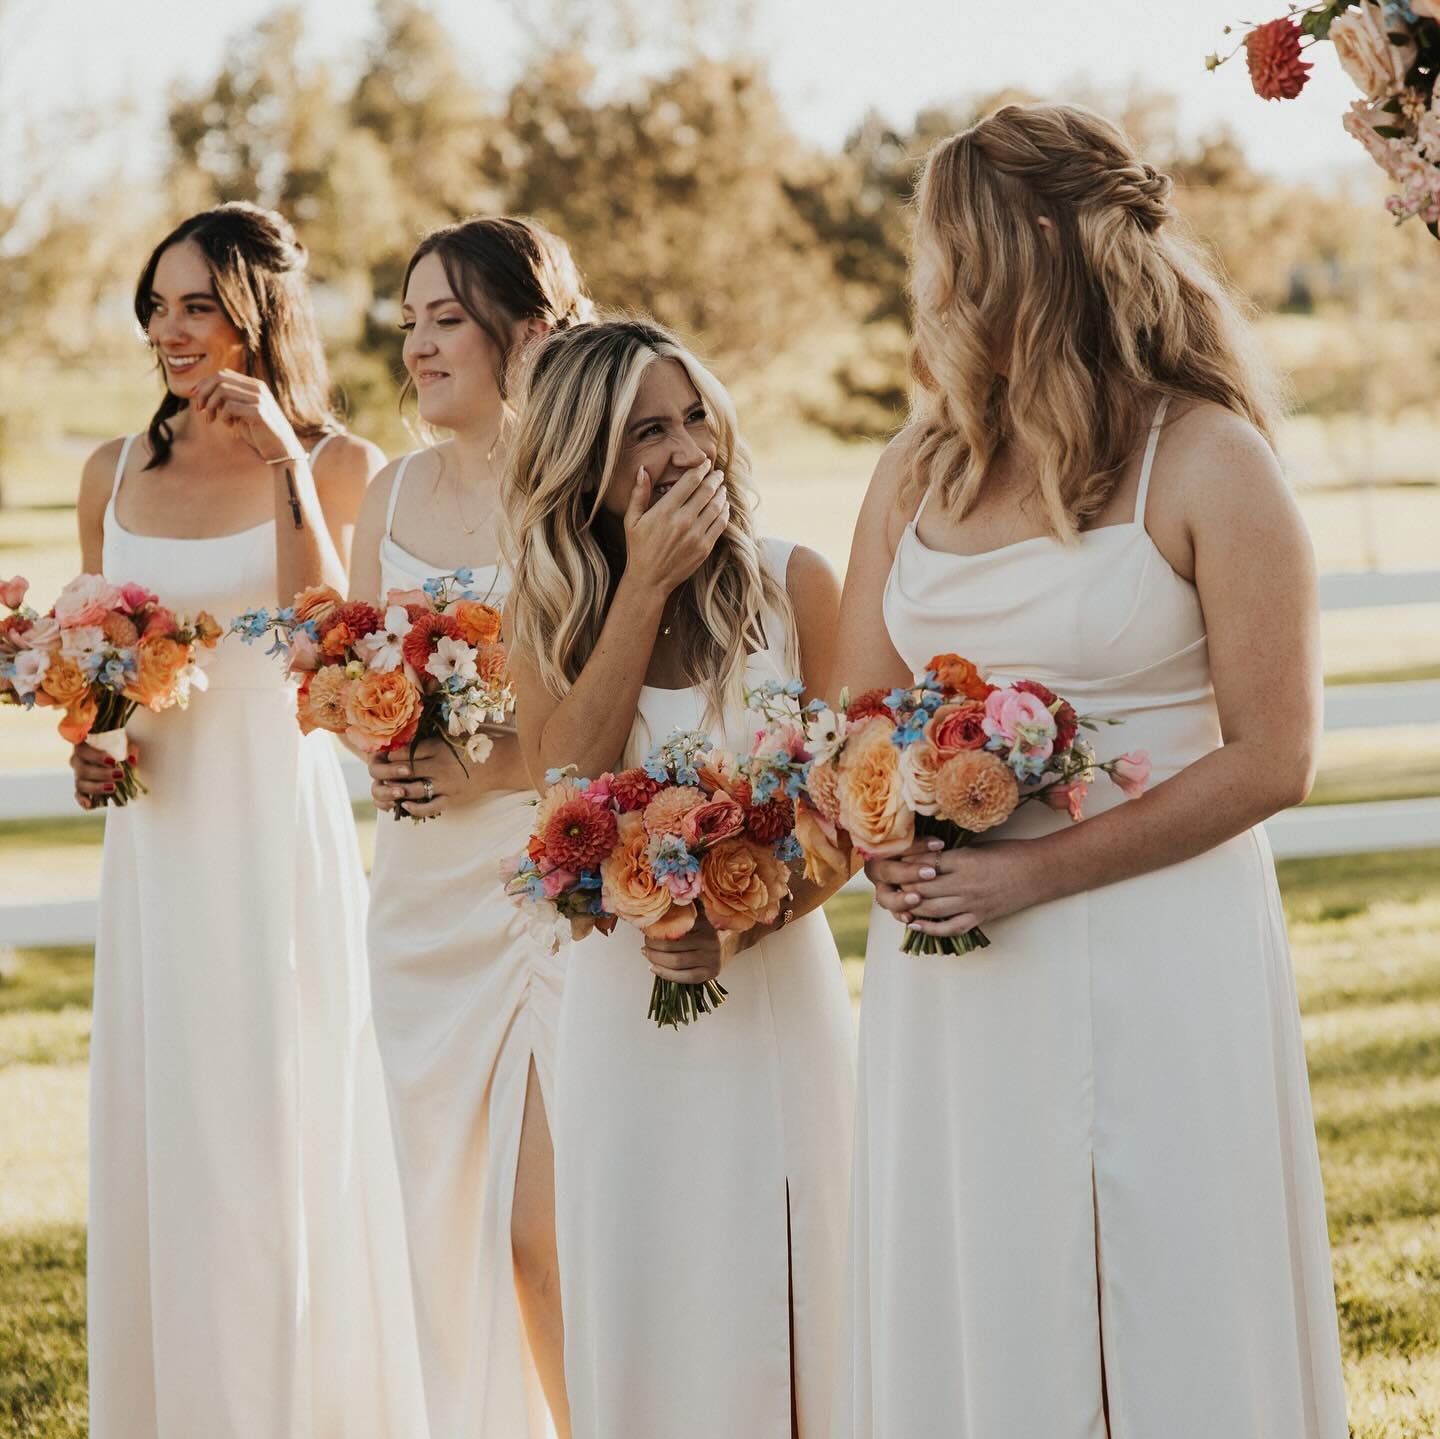 Holding more than just flowers on your wedding day; clutching years of laughter, tears, and memories that bloom as bright as the bouquet that you hold. 

@sunnieheers 
@thebarnatraccooncreek